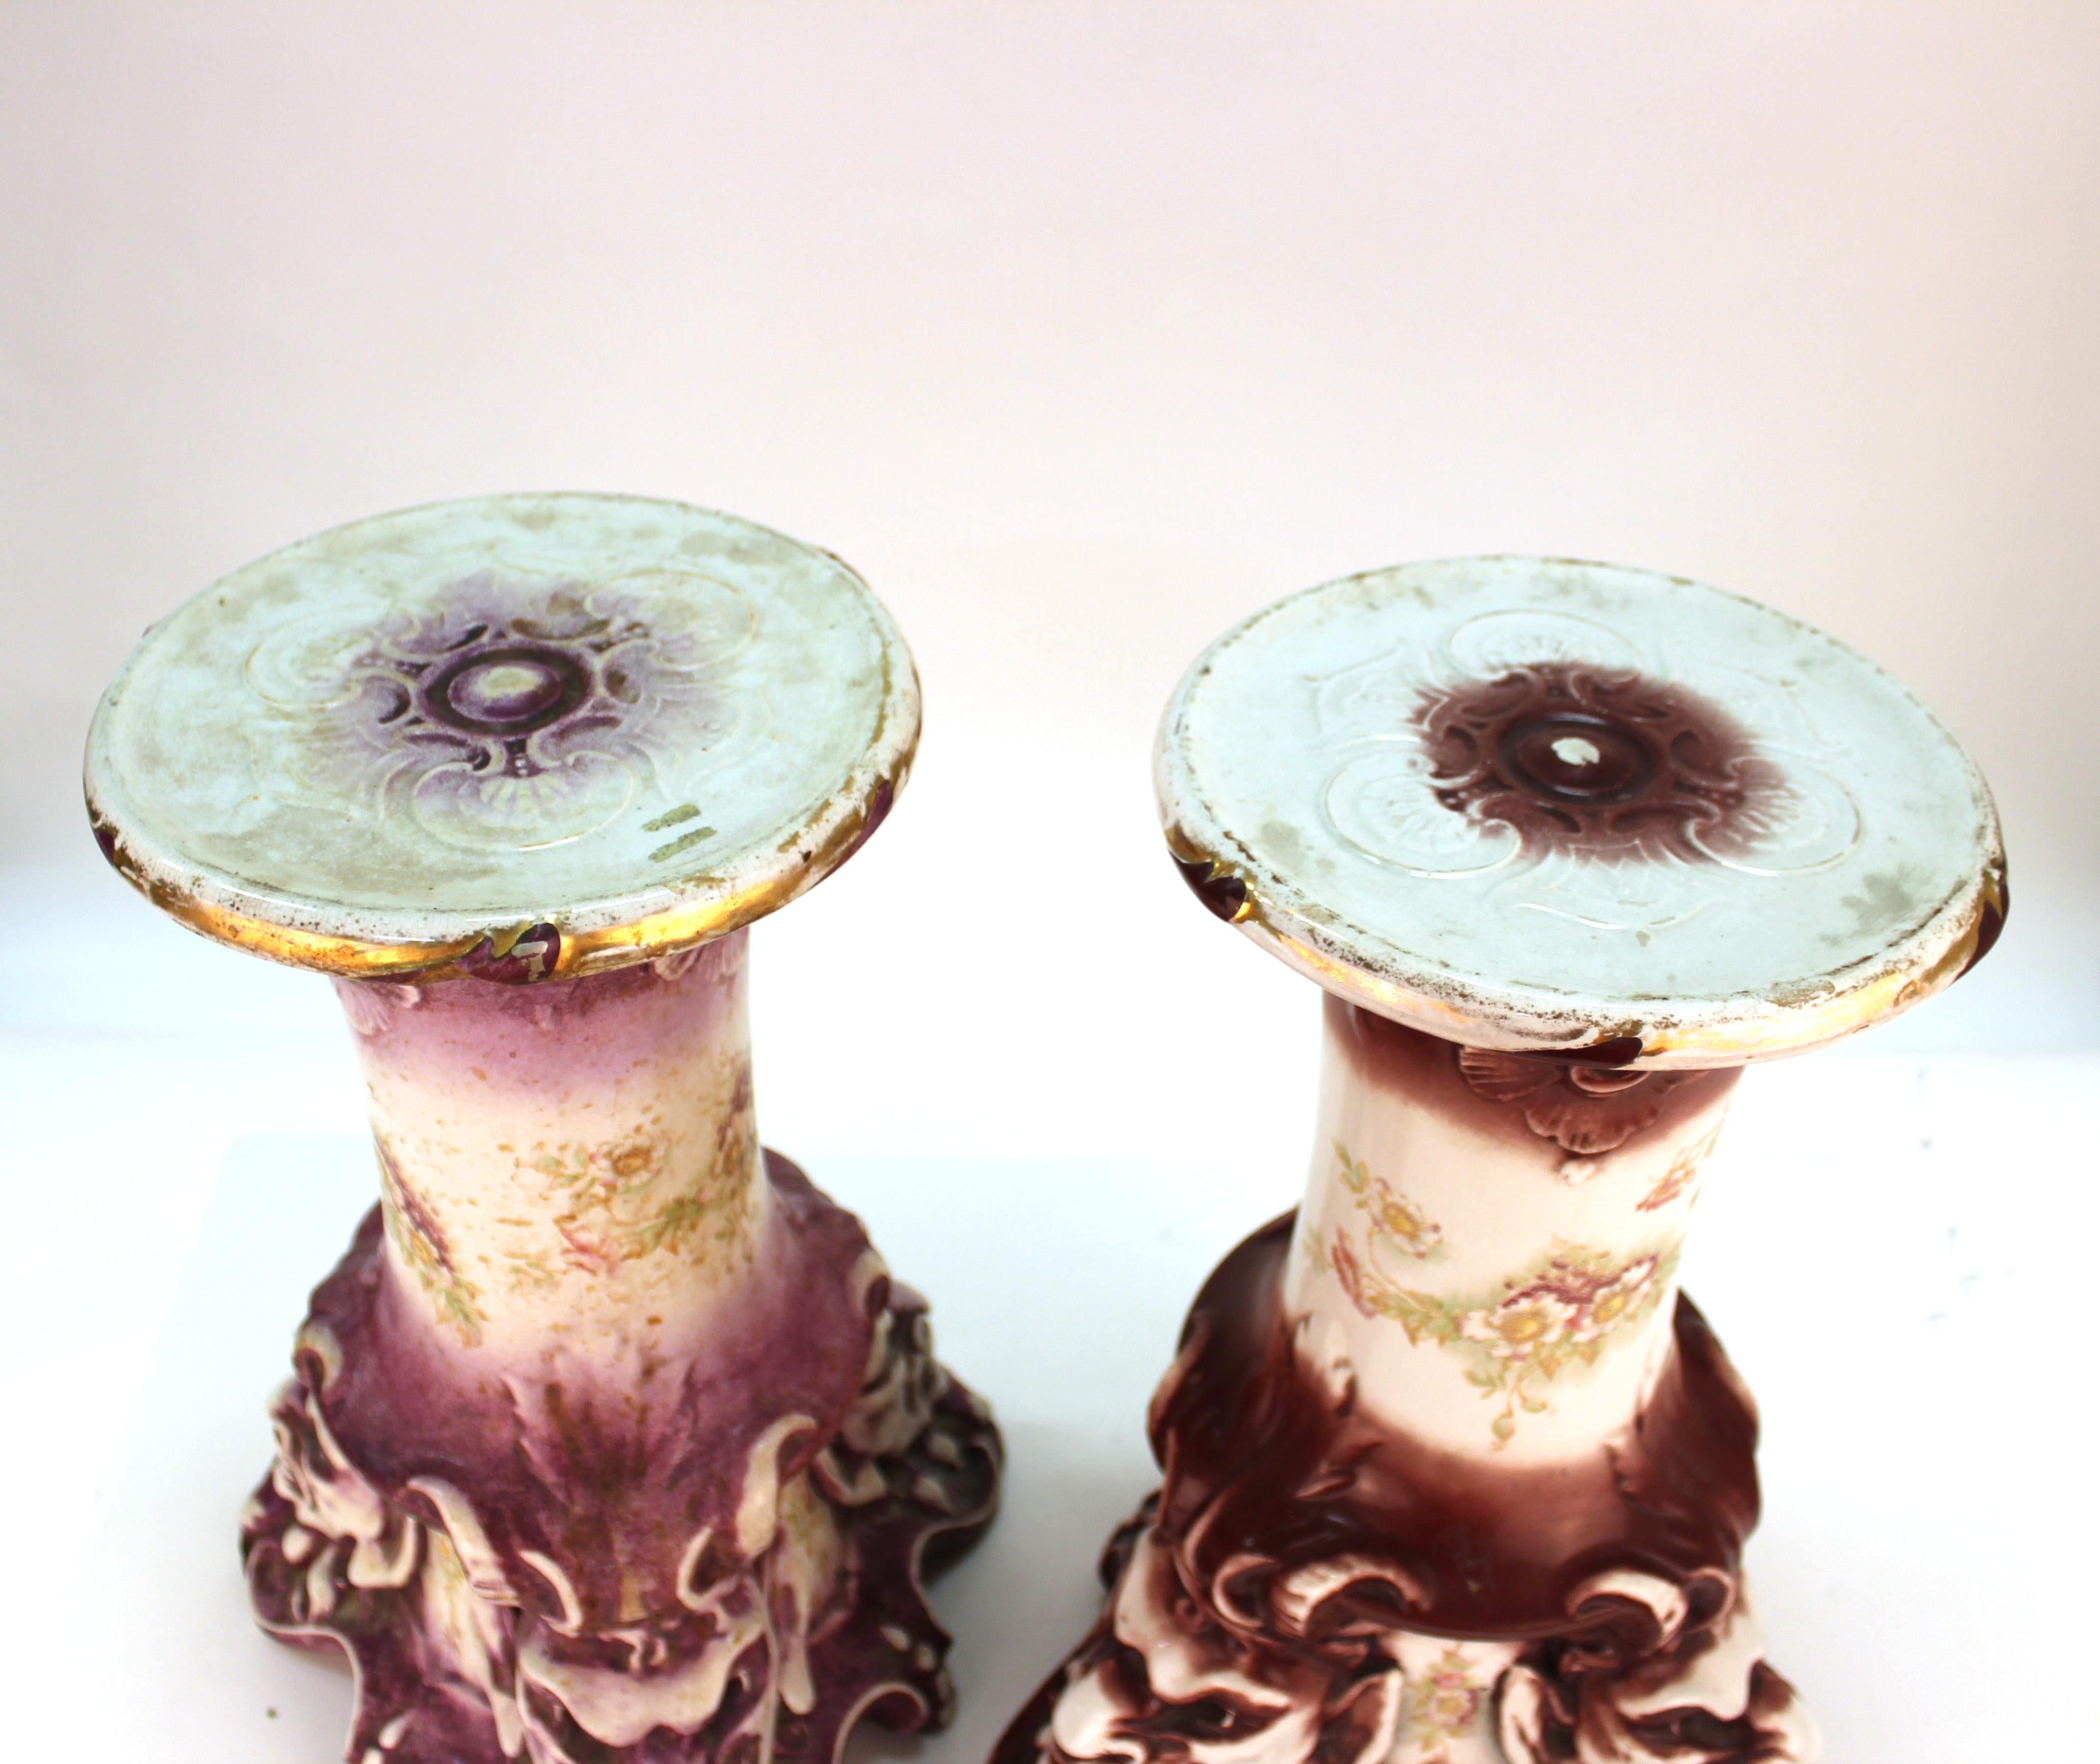 Victorian Alba China Ceramic Hand-Painted Pedestals in Grotesque Style 4